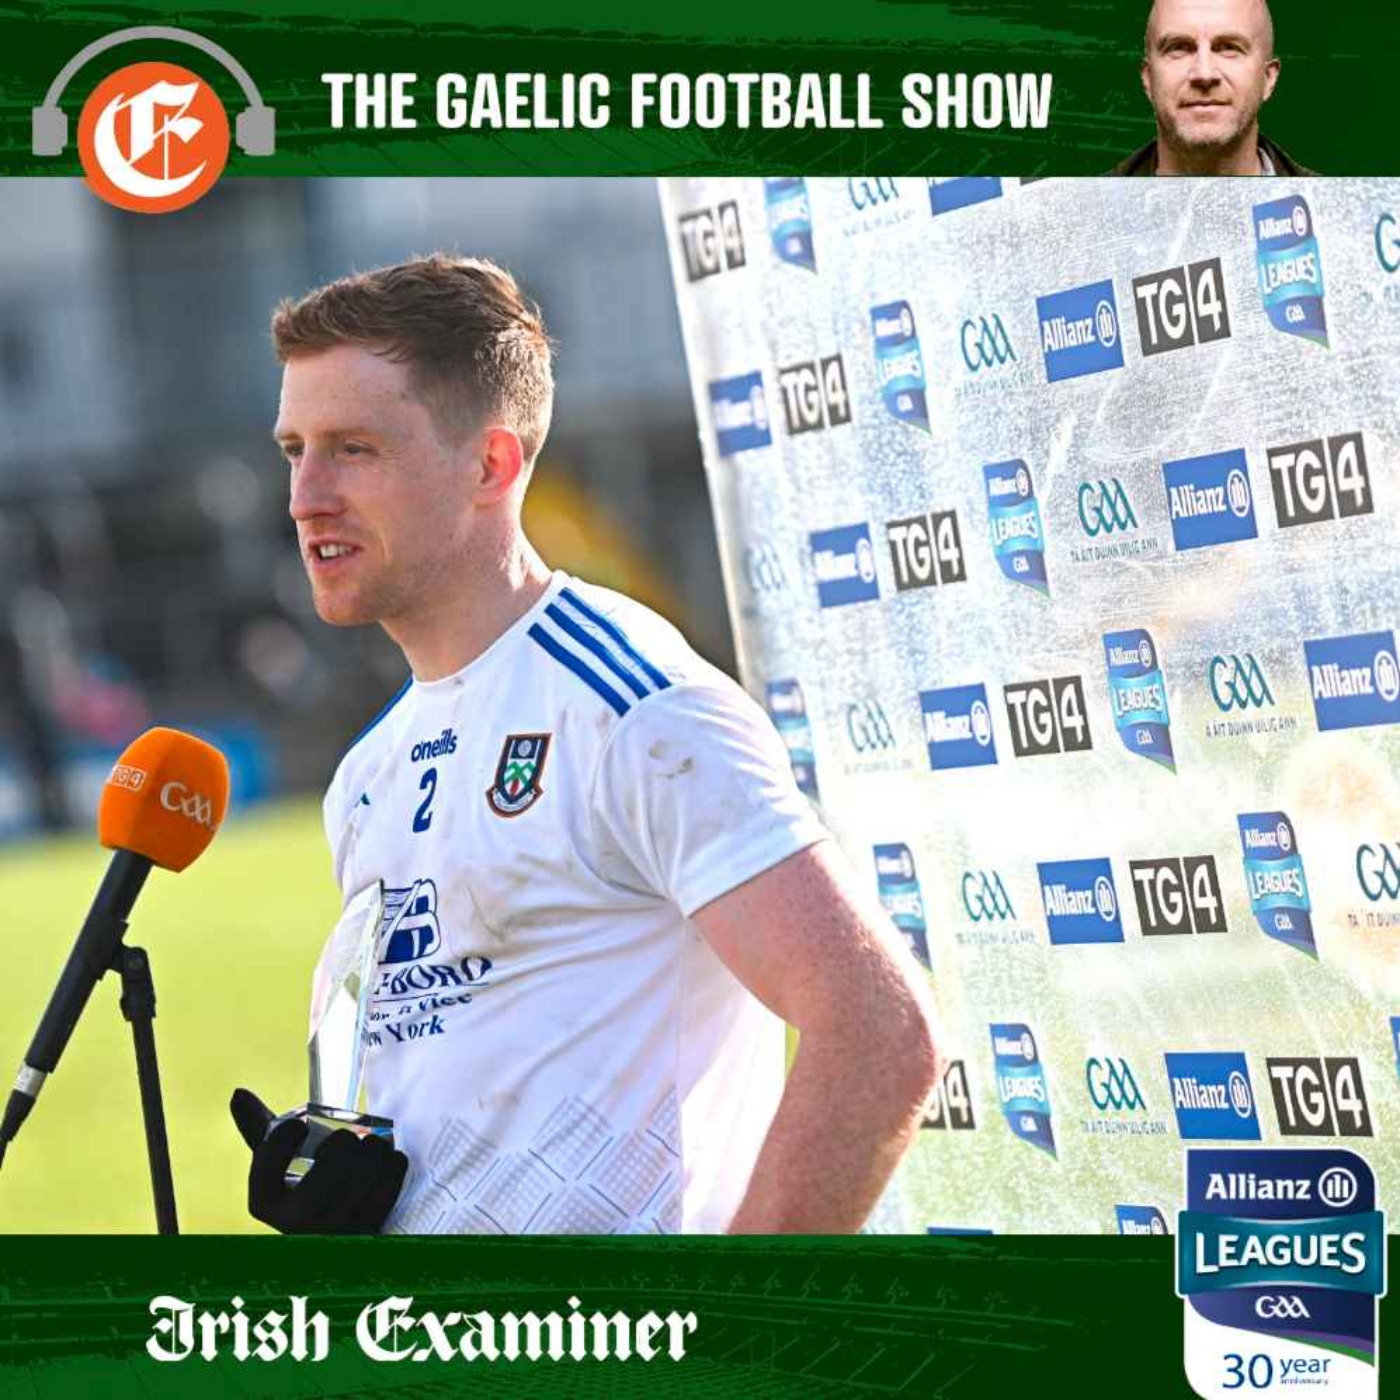 Allianz Football League Show: Players stop talking, Dublin stop losing, can Cork stop the rot?